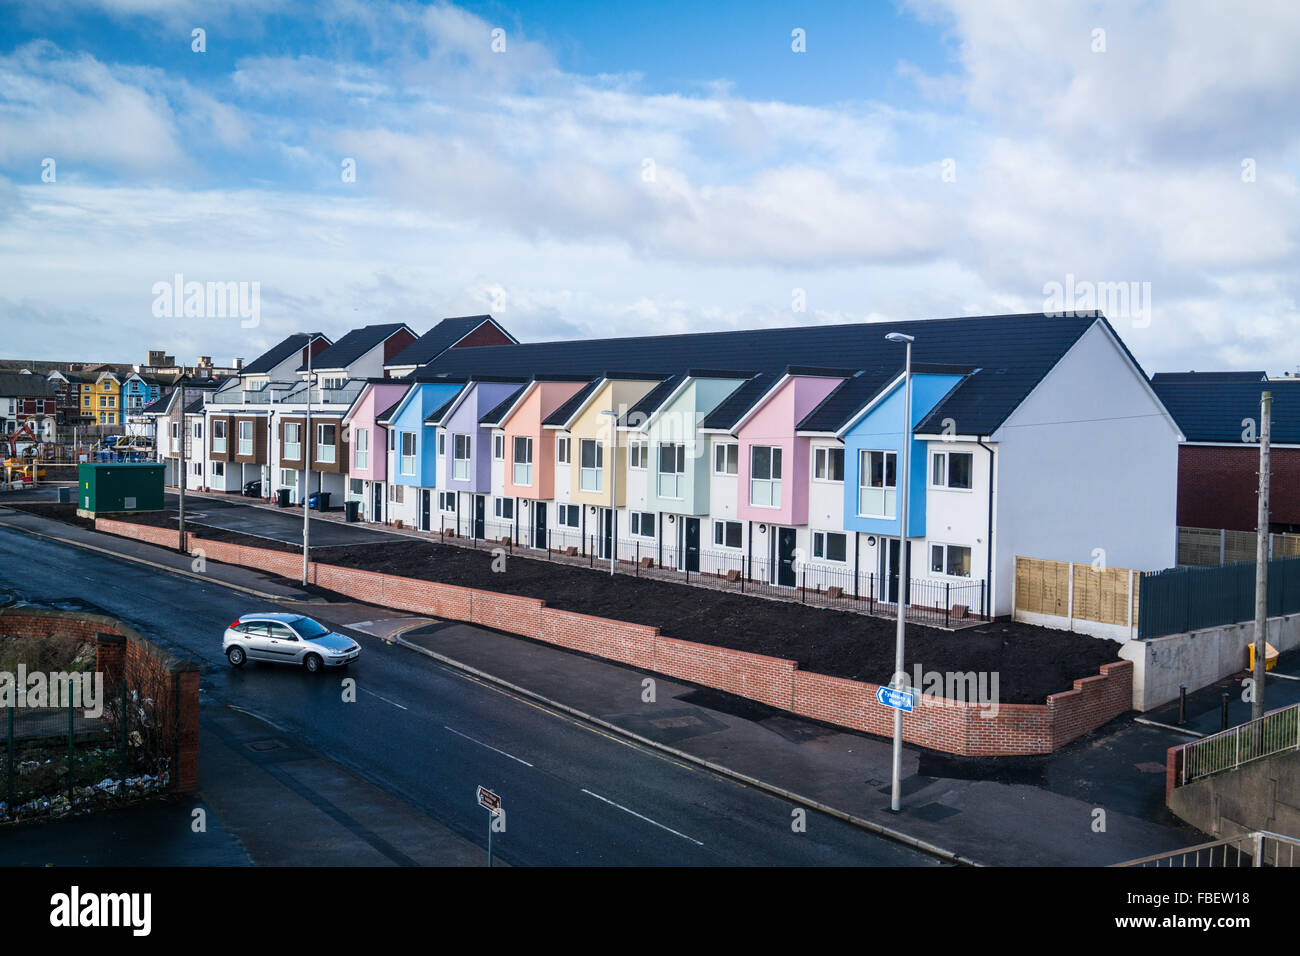 Colourful row of new built terraced housing Stock Photo